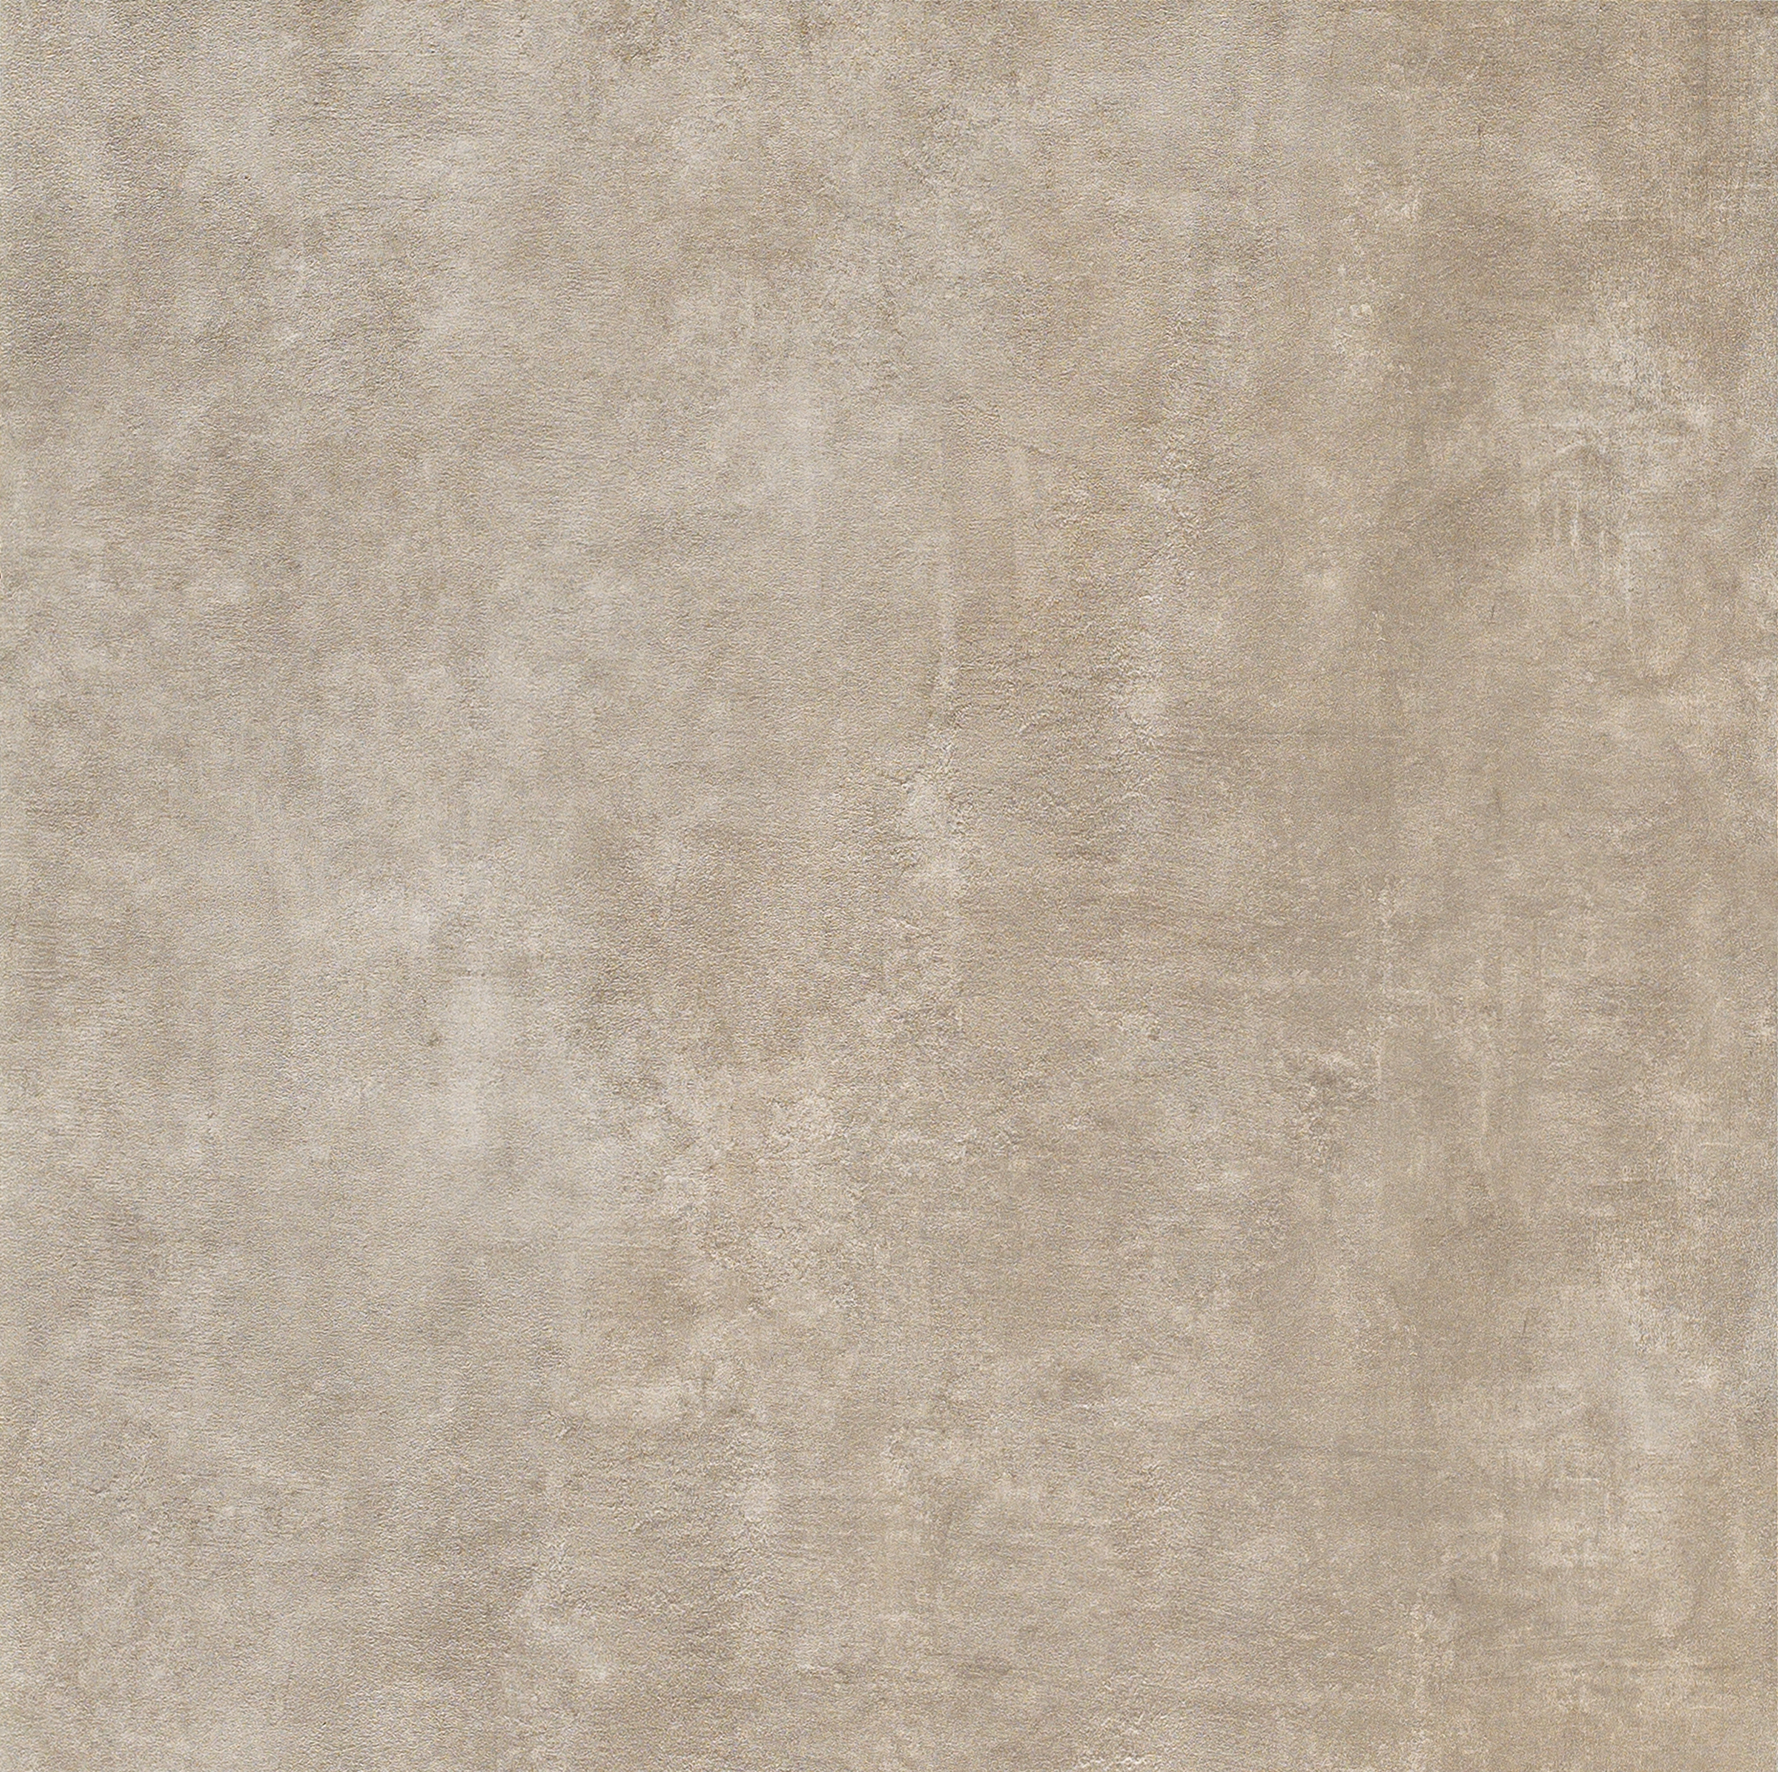 Unicom Starker 2Thick Icon Taupe Back Outdoor 7820 80x80cm rectified 20mm